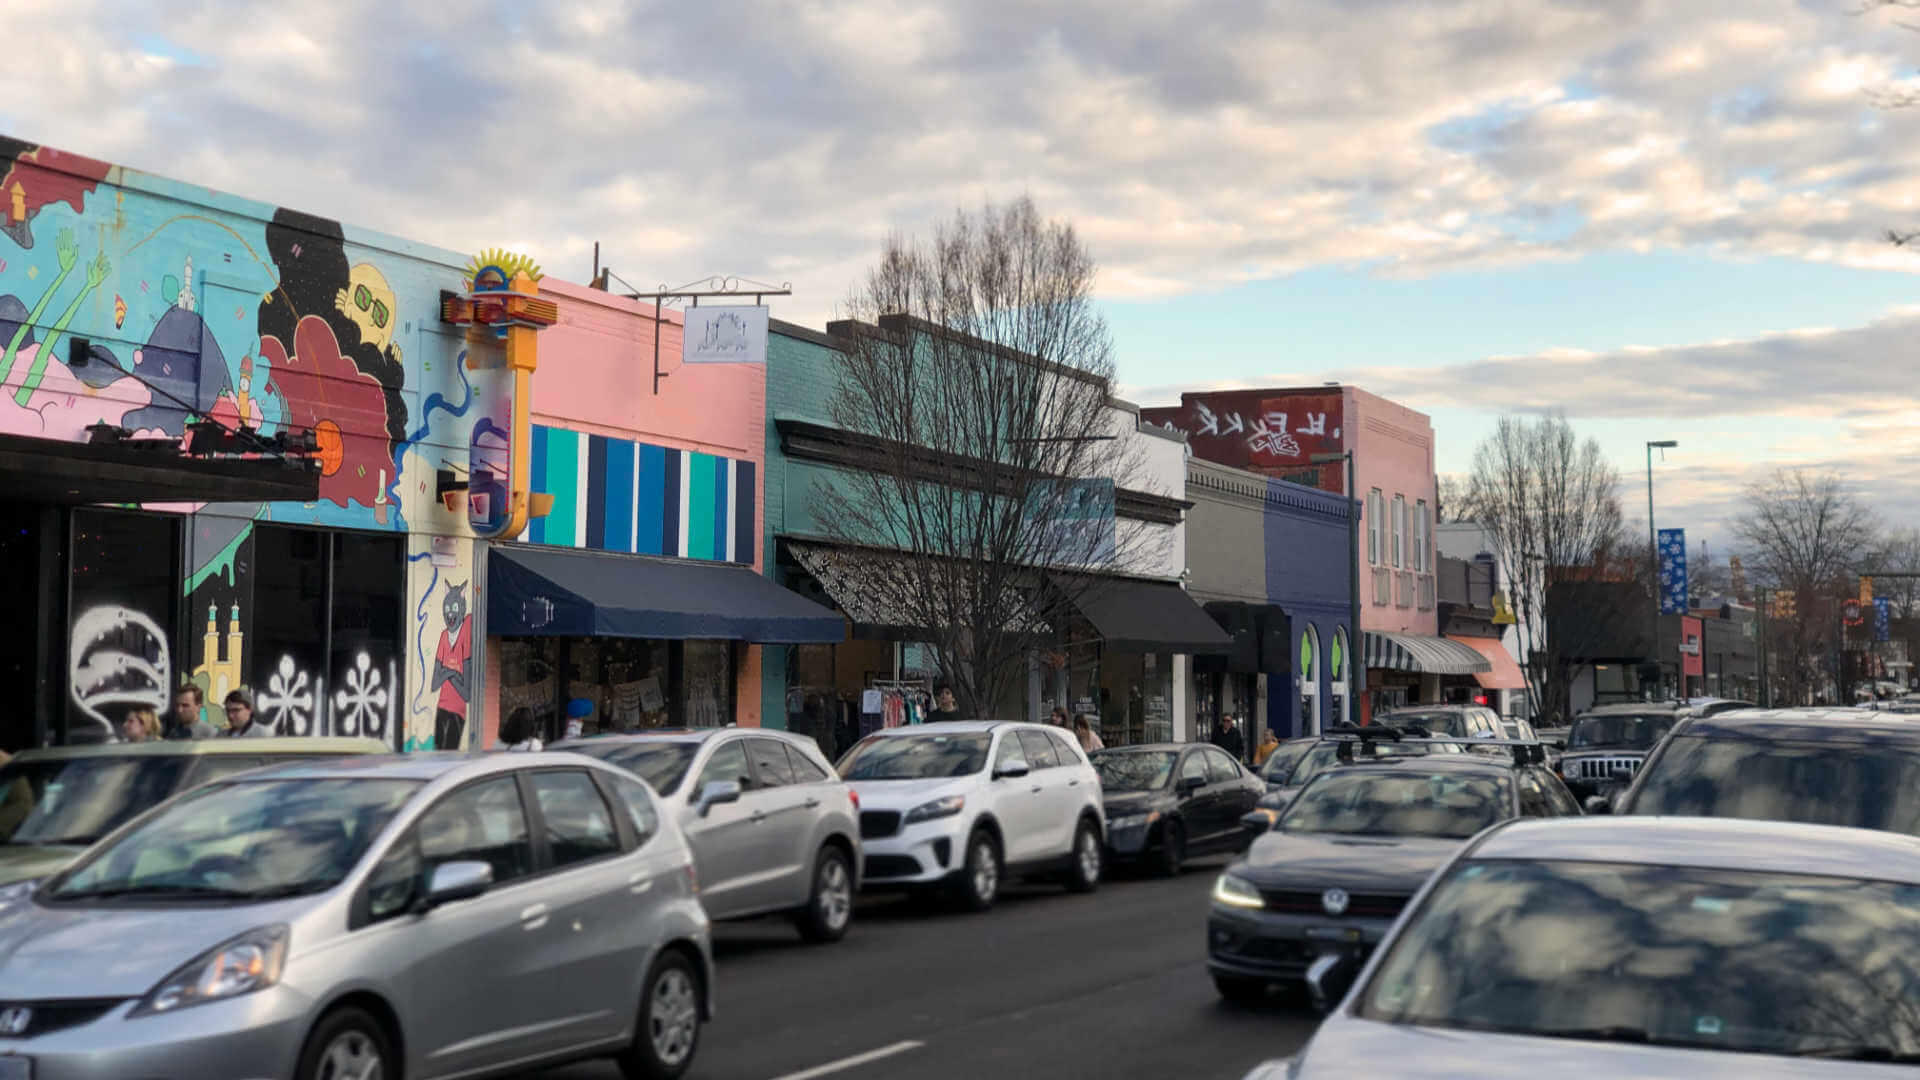 City life vs country life: An historic shopping area loaded with everything you could possibly want to purchase, mostly from local small businesses! An advantage of city life.